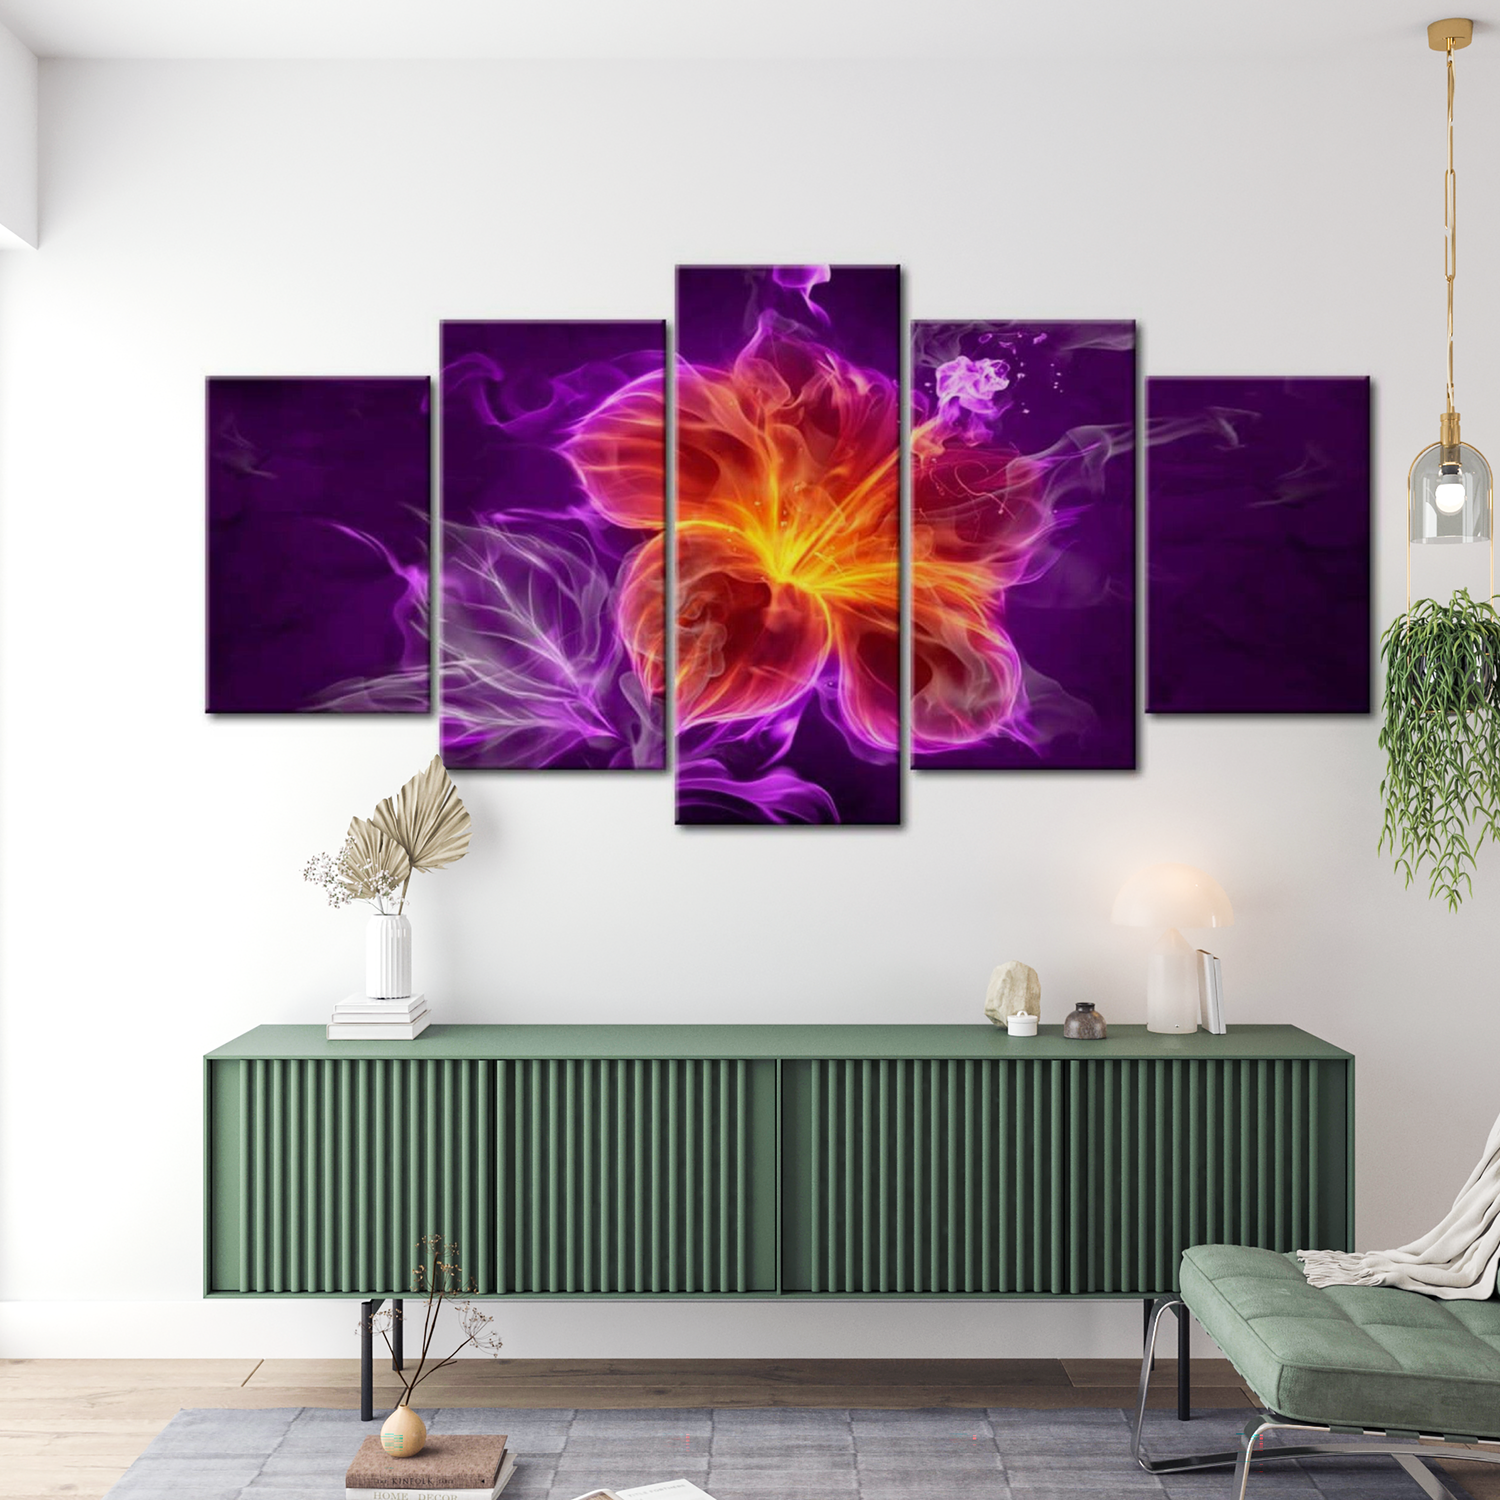 Stretched Canvas Glamour Art - Esoteric Flower 40"Wx20"H